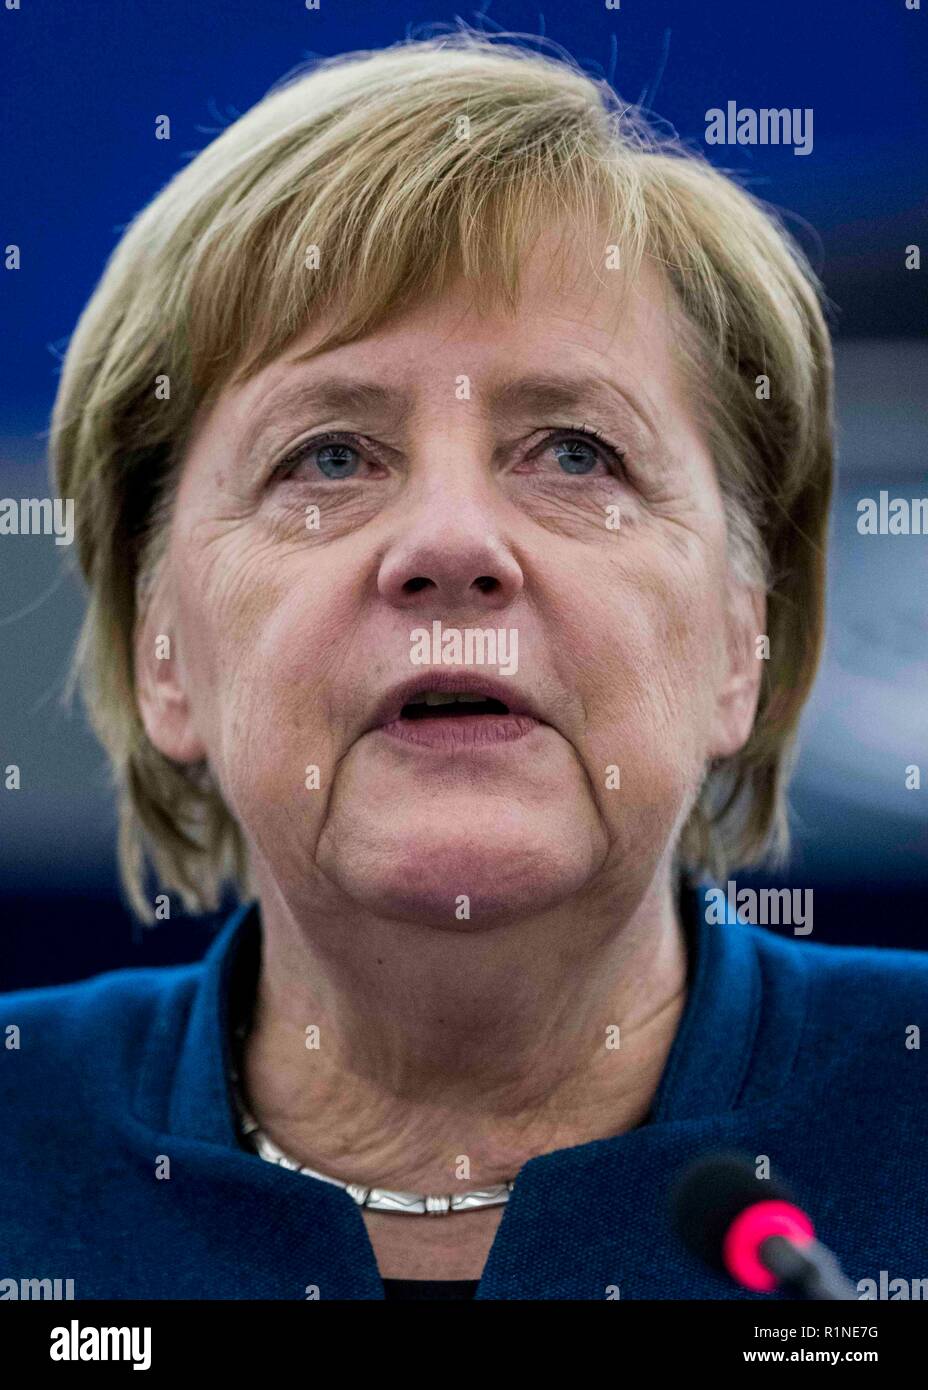 German Chancellor Angela Merkel seen speaking at the debate about the future of Europe with the members of the European Parliament, in Strasbourg, eastern France. Stock Photo